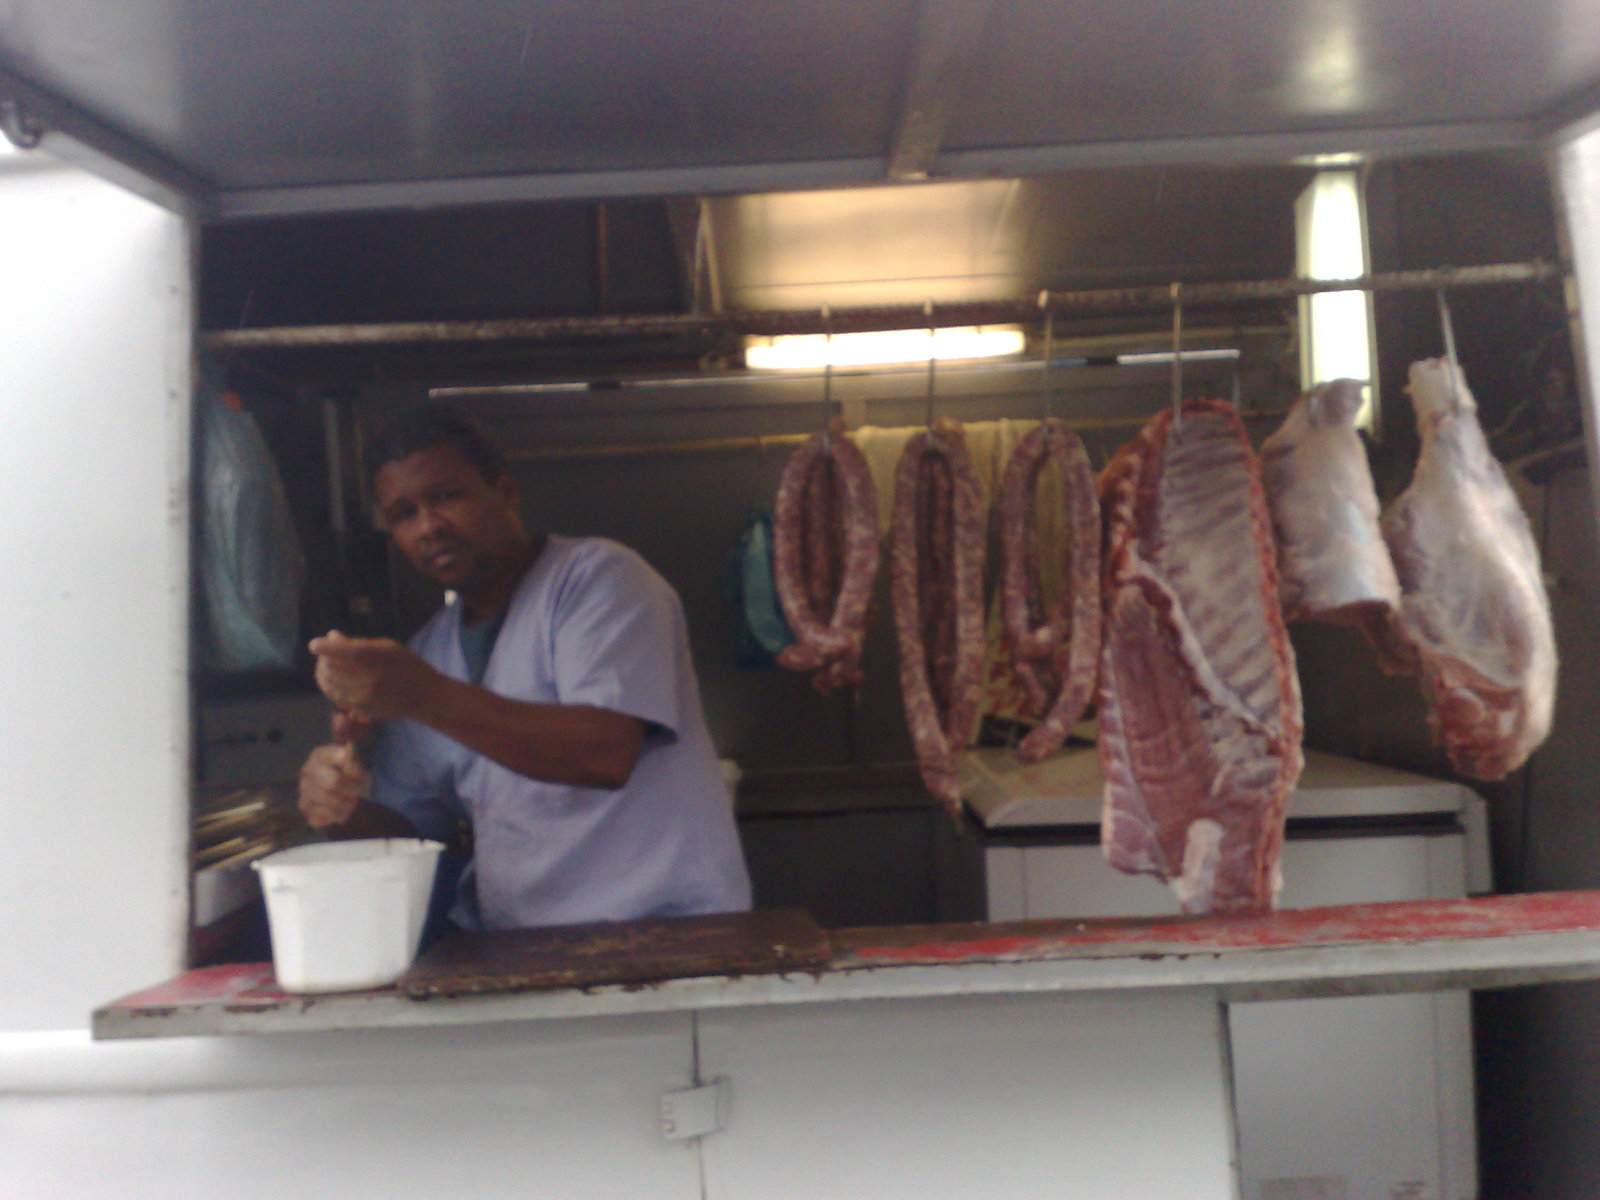 a butcher in his kitchen making cuts of meat